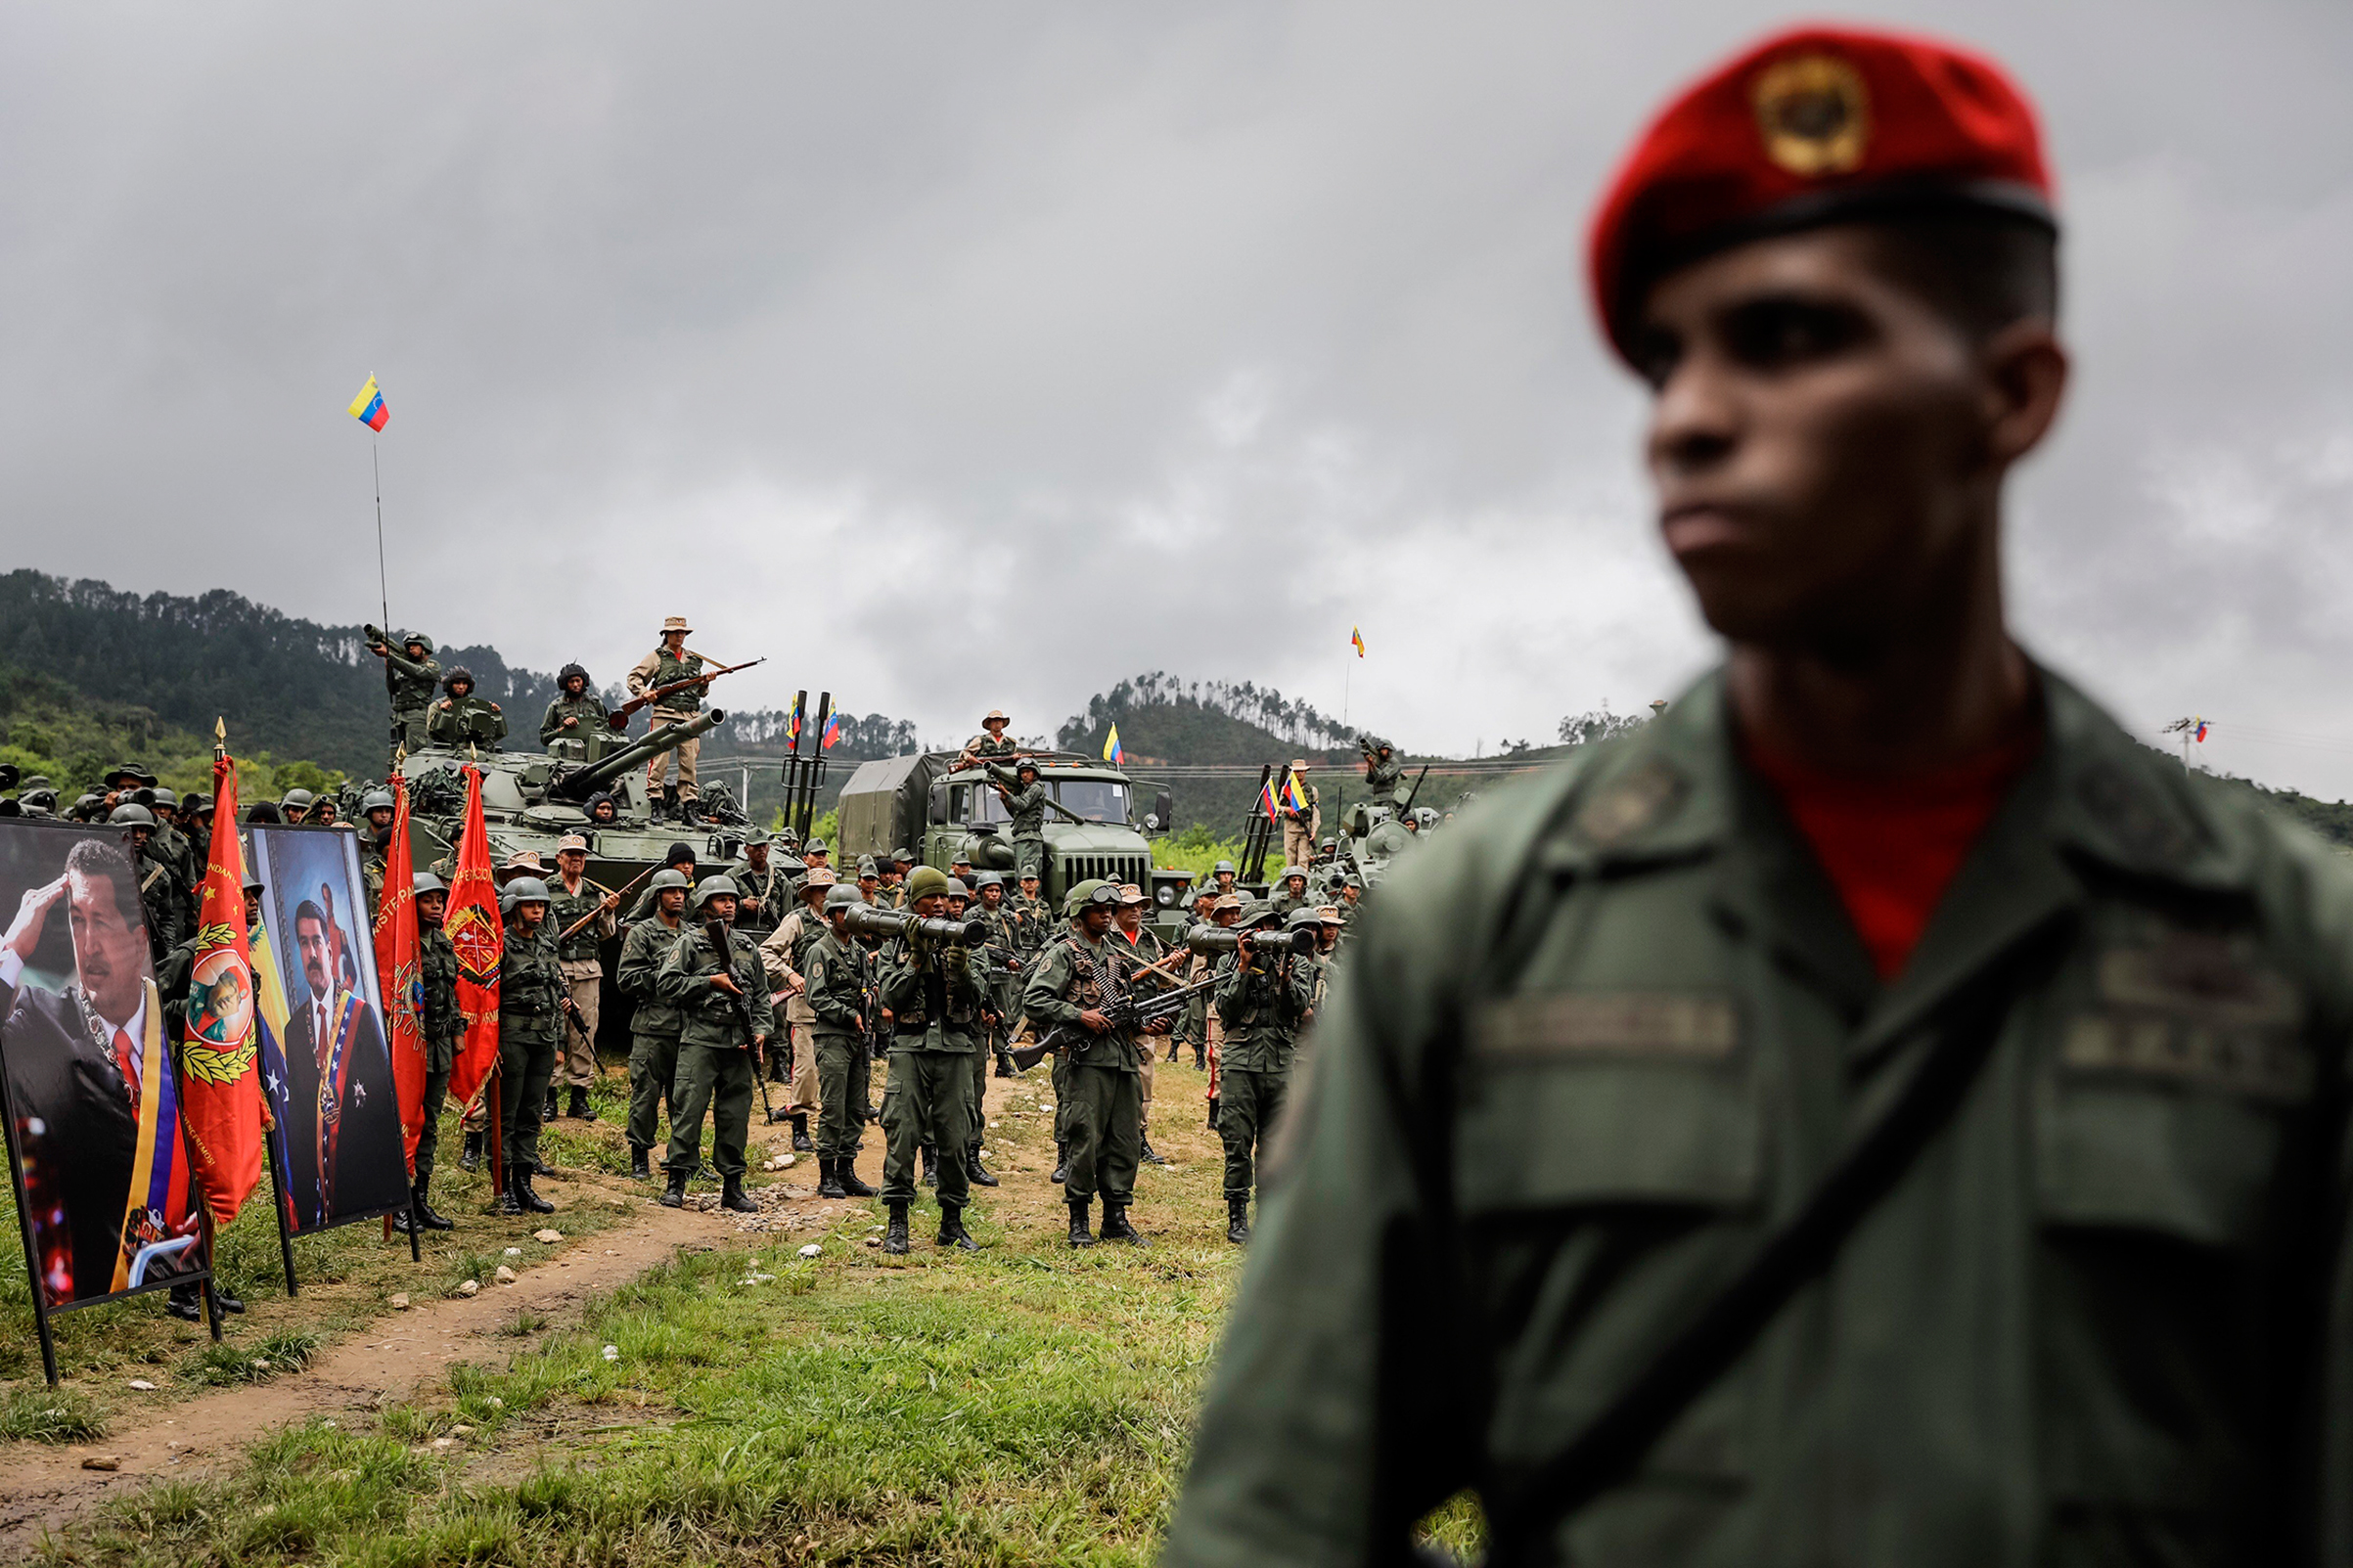 Venezuelan soldiers staged a show of force in Caracas on Aug. 14 in response to Trump’s remarks (Miguel Gutiérrez—EPA)